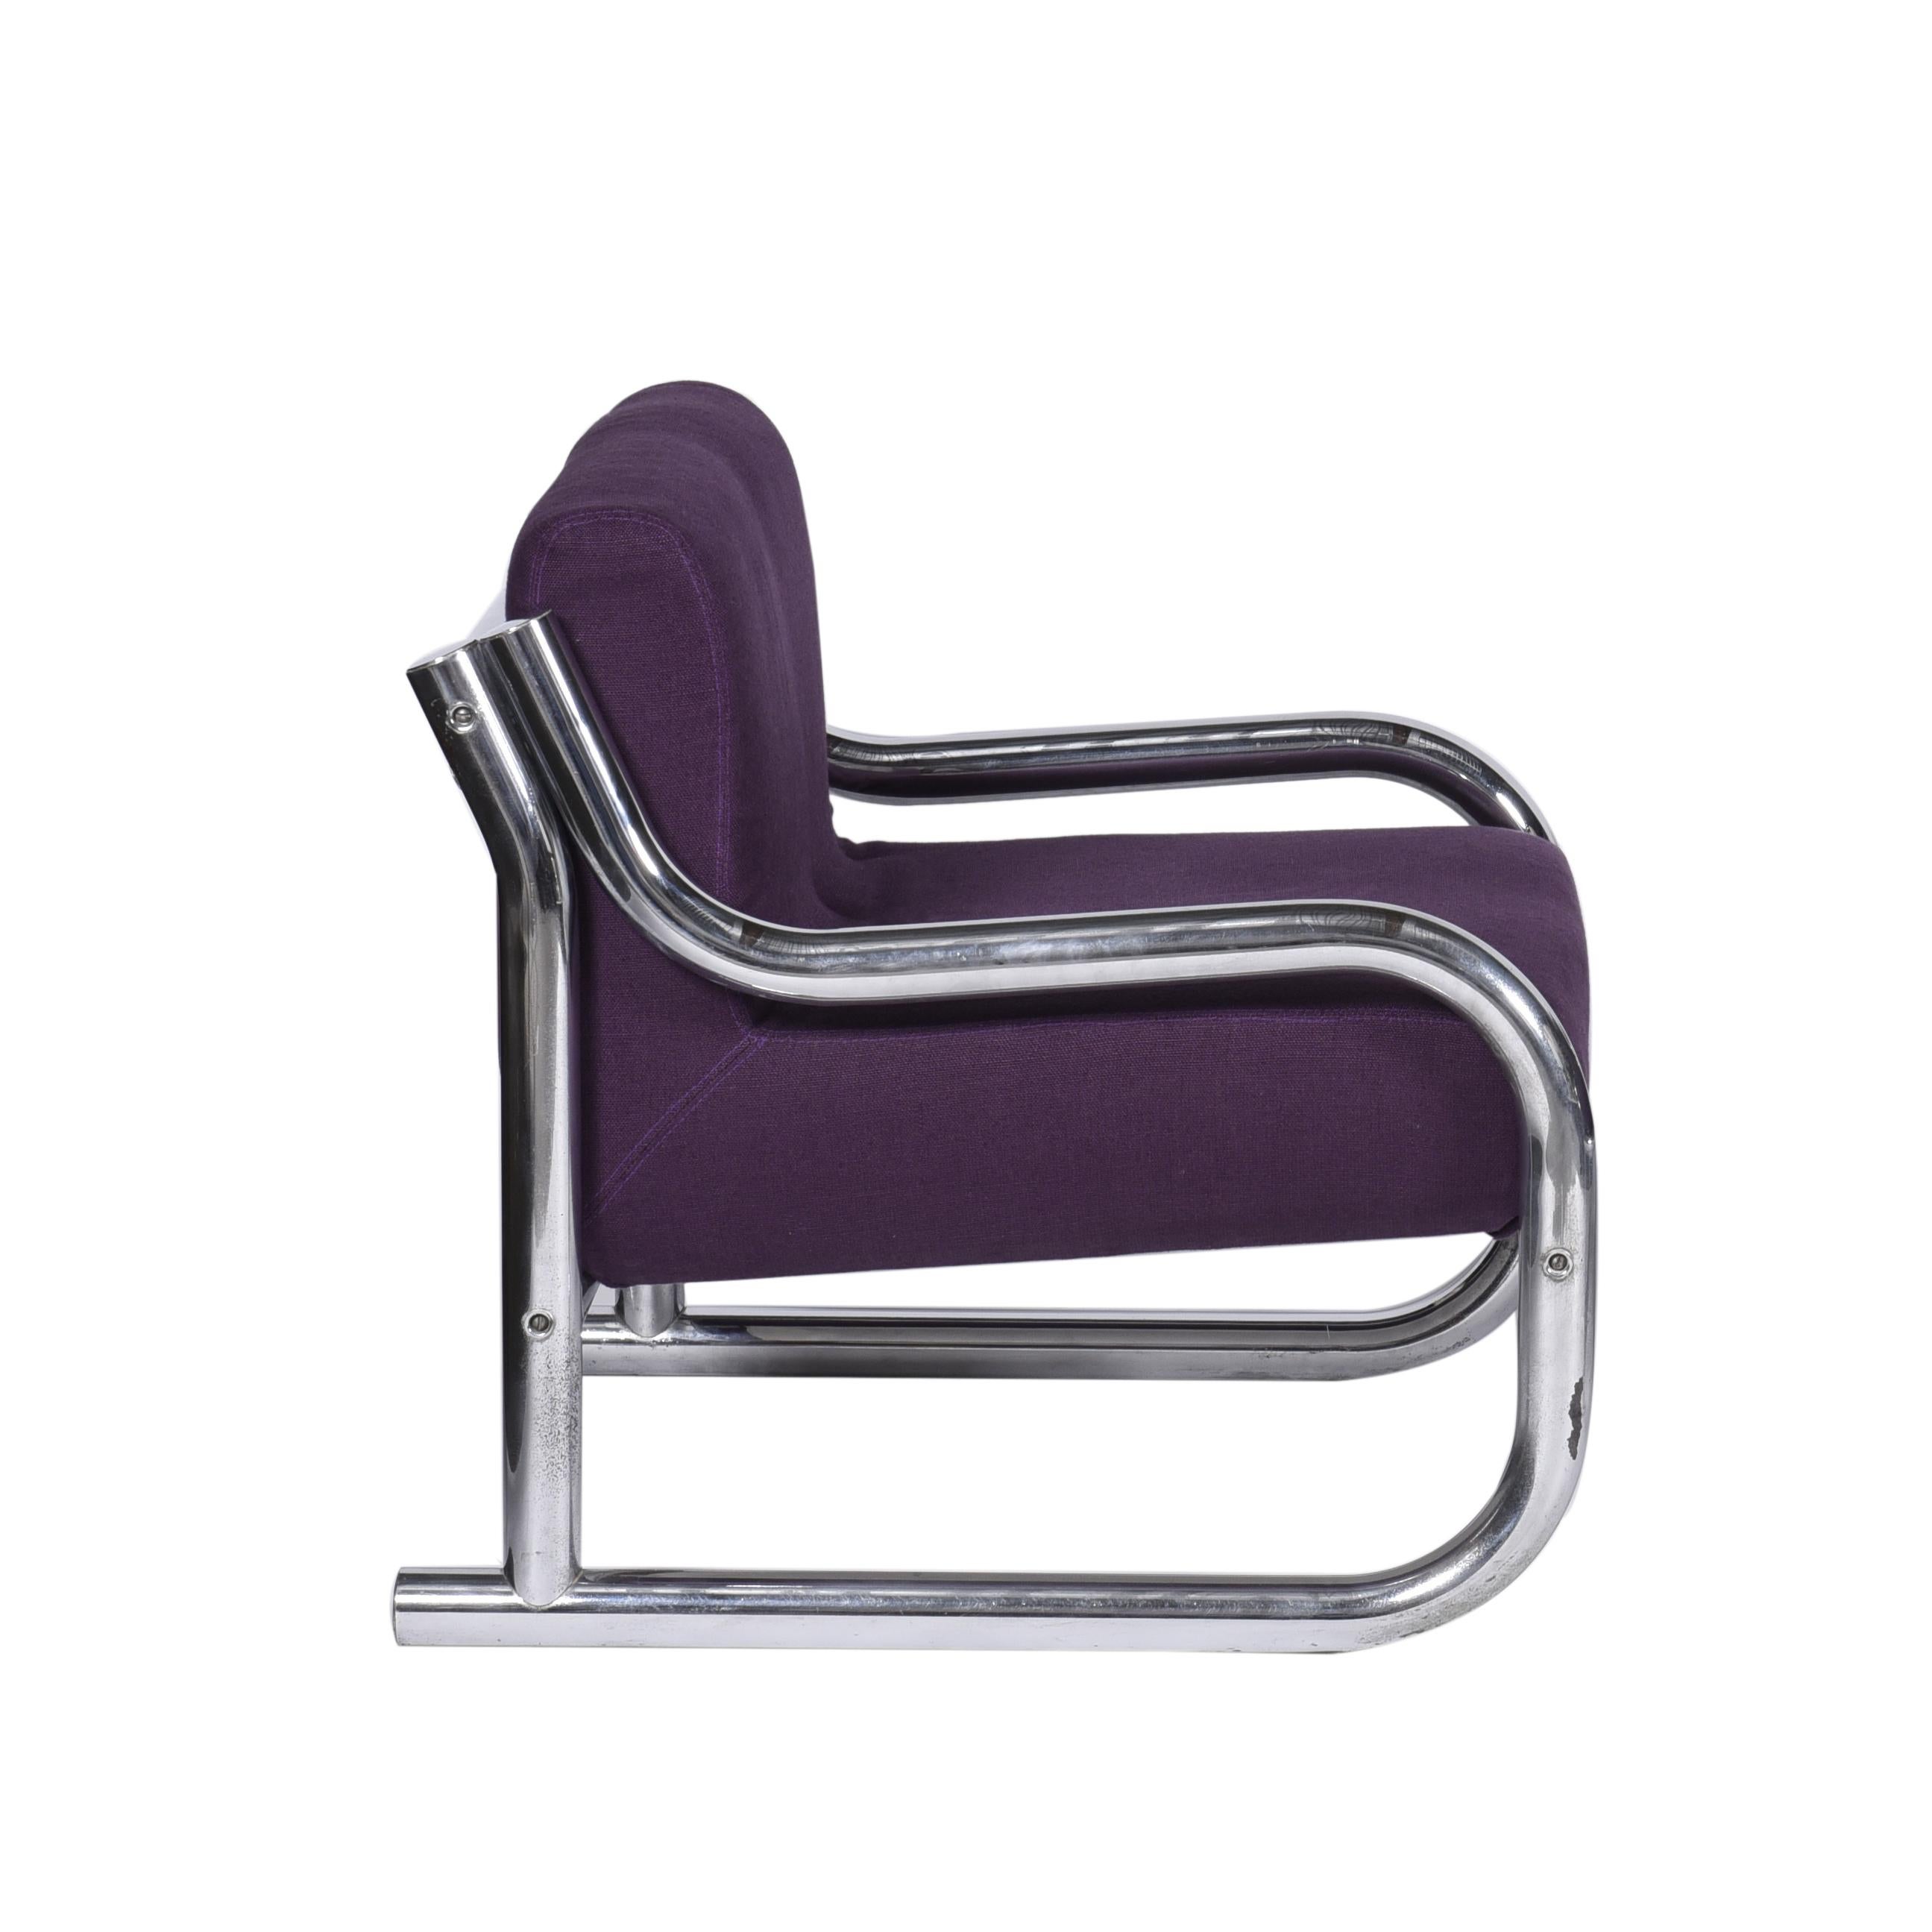 Geraldo de Barros Midcentury Brazilian Armchair in Chromed Tubular Metal, 1960s.

Armchair with chromed tubular structure designed by Geraldo de Barros in the period of existence of Hobjeto, company after Unilabor. We kept the chrome in the original